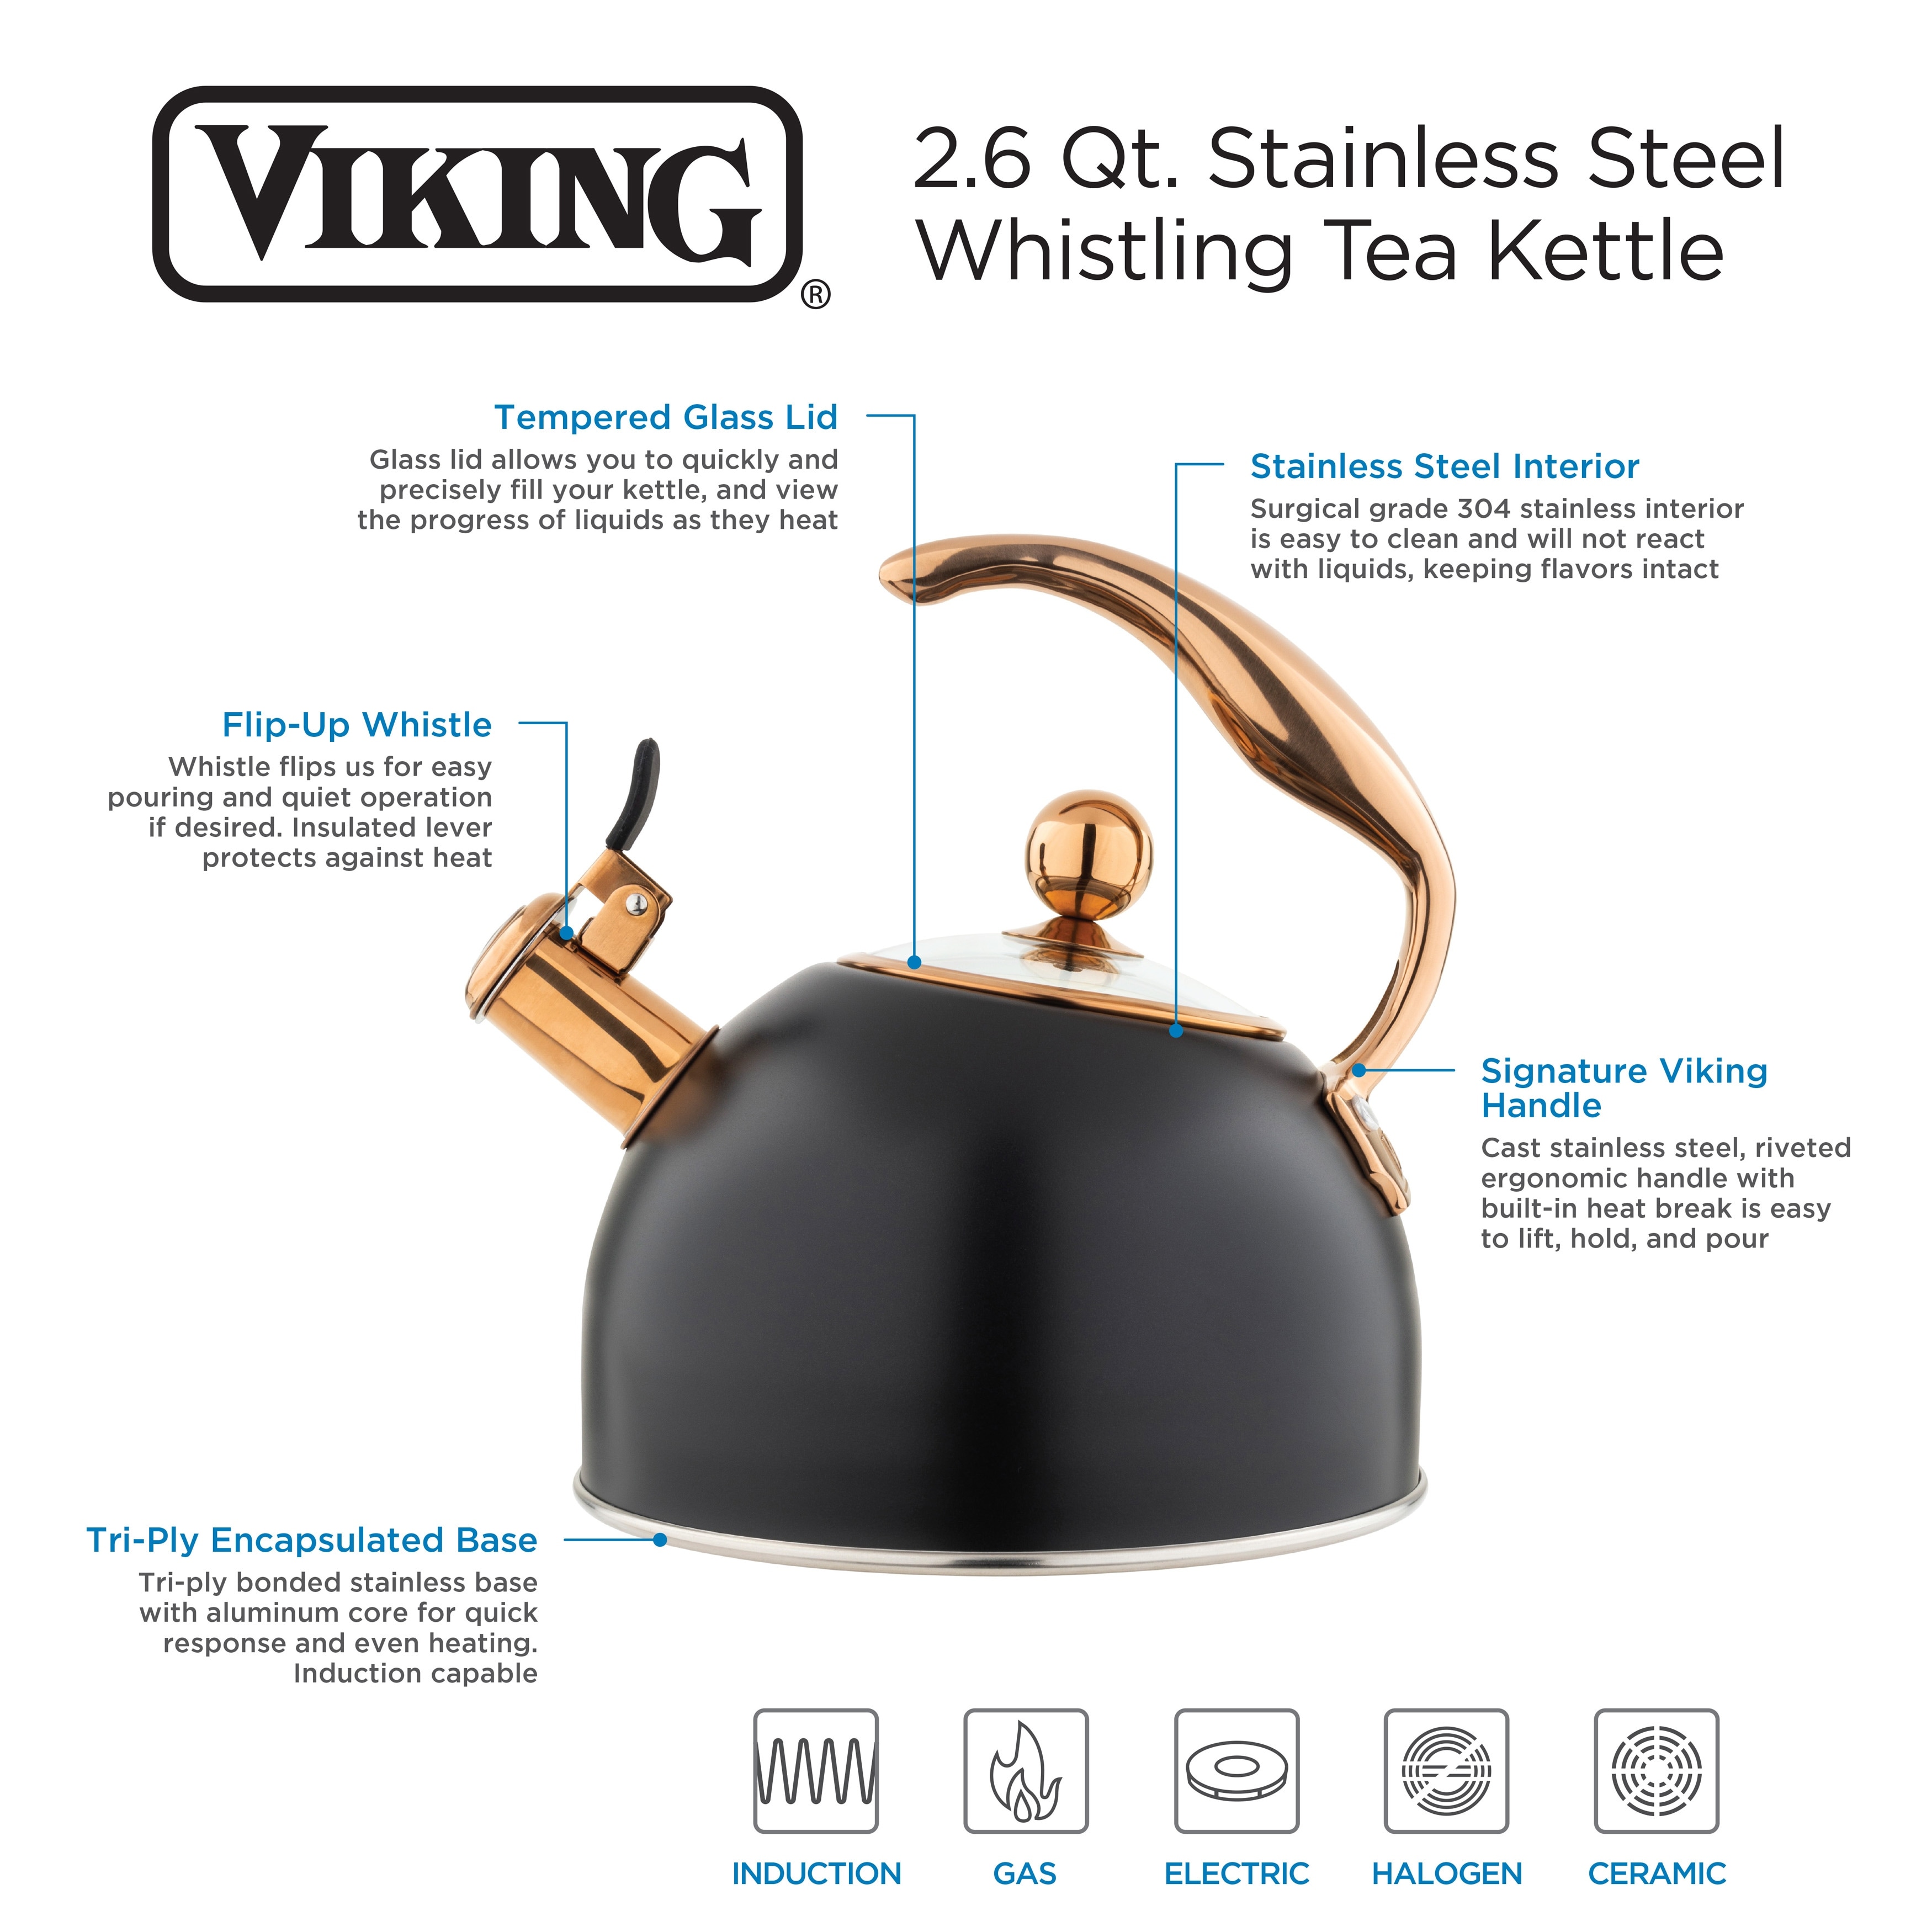 https://ak1.ostkcdn.com/images/products/is/images/direct/5701d97cfc6d89bf1f14d00c8a1fe62d52984755/Viking-2.6Qt.-Tea-Kettle%2C-black-%26-copper.jpg